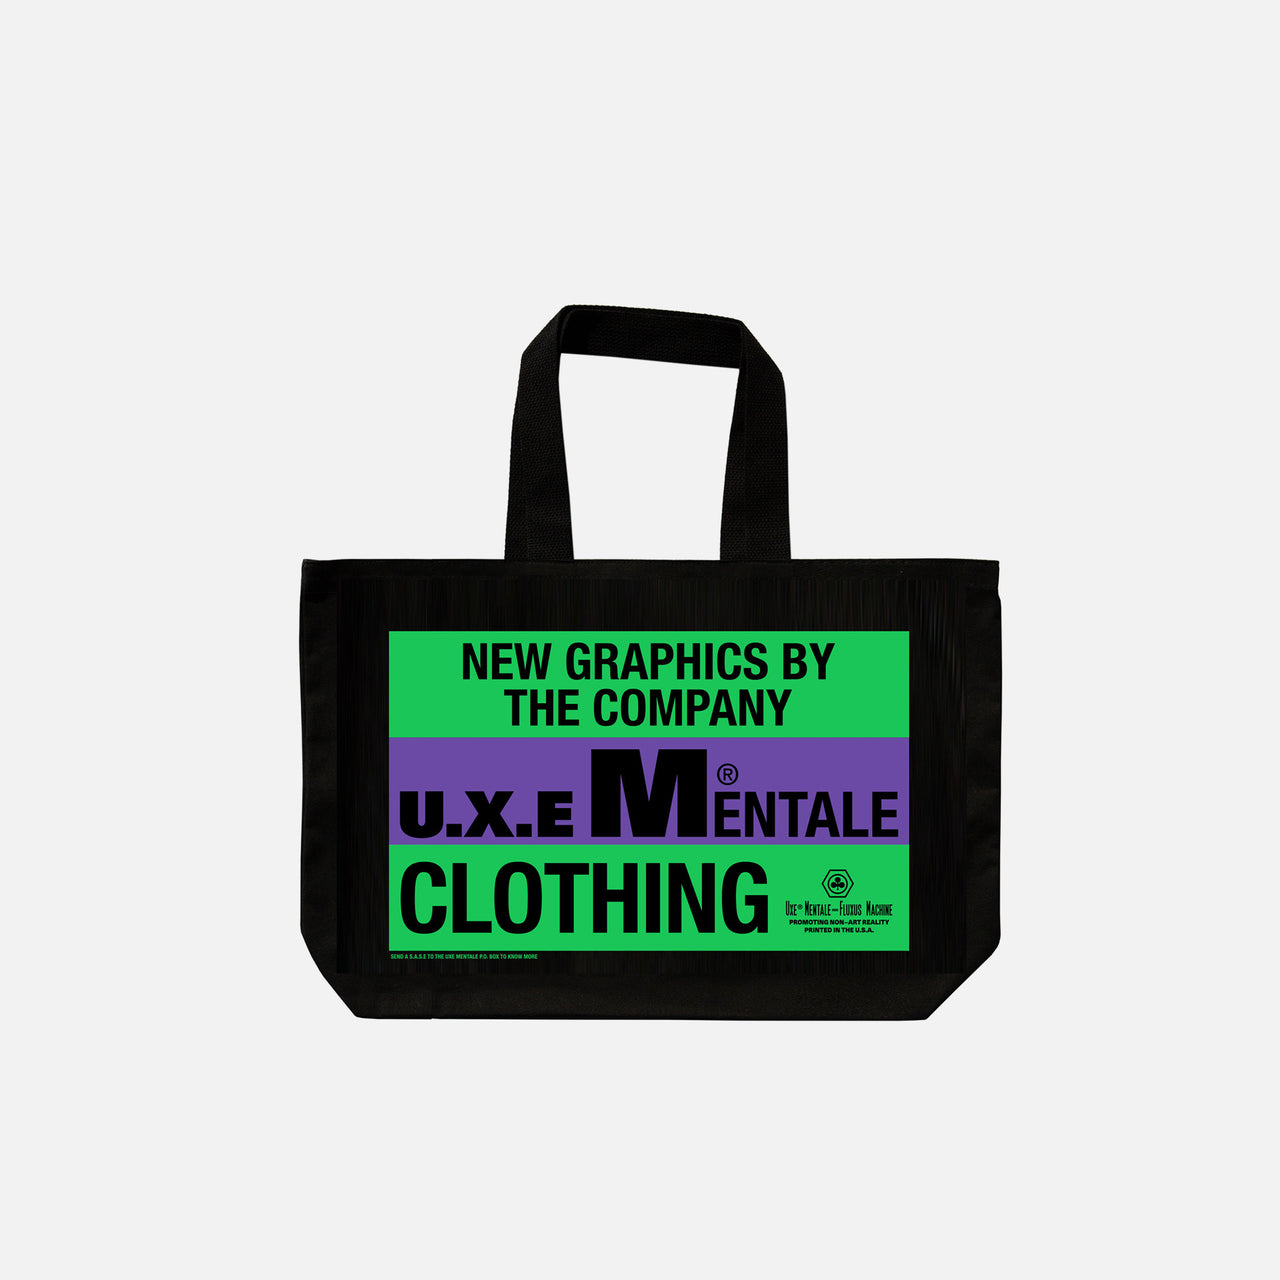 New Graphics (A.K.A. THE COMPANY) Oversized Canvas Tote Bag